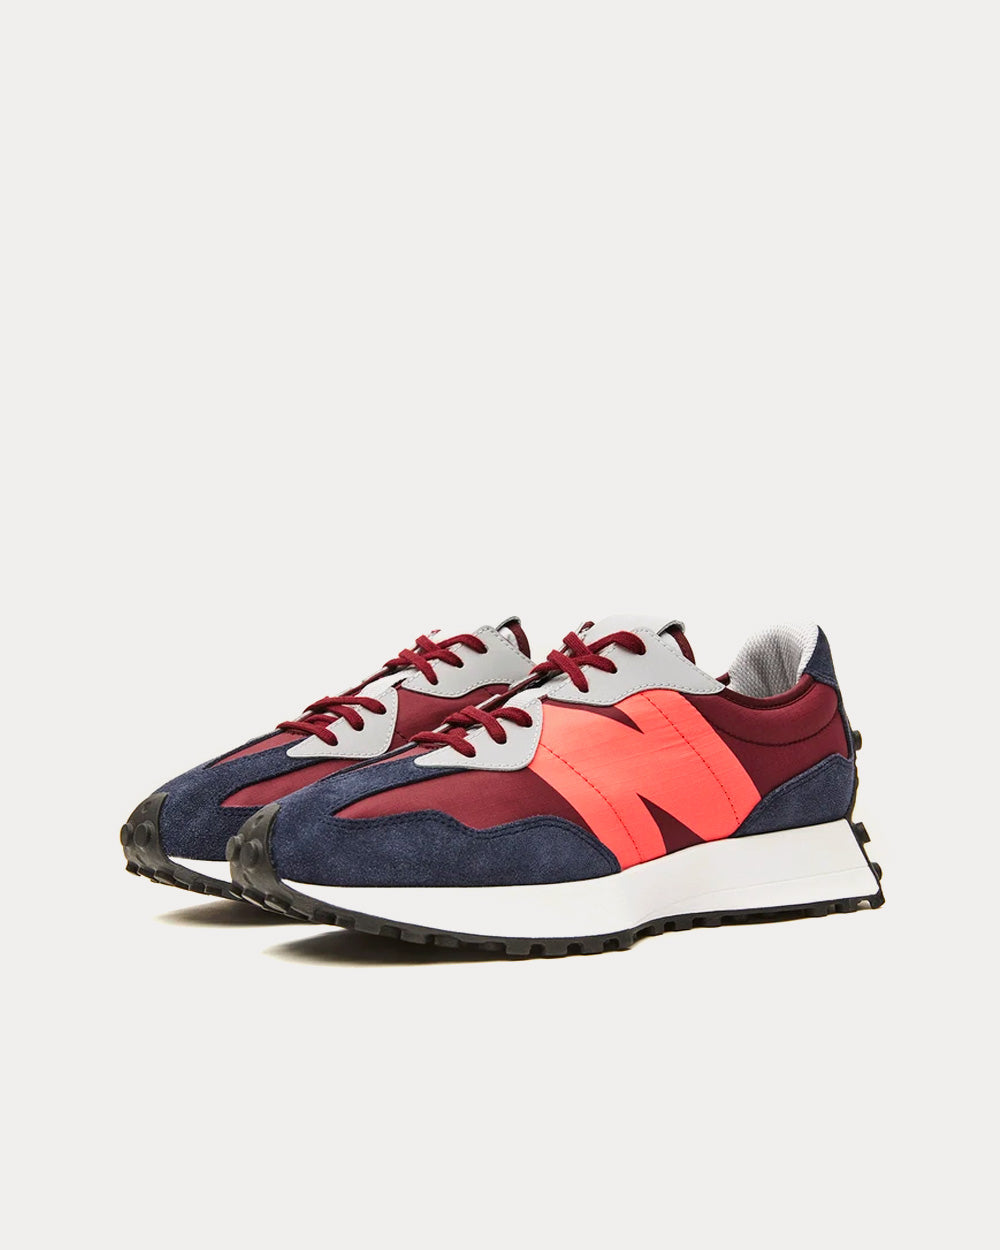 New Balance - x Figs 327 Burgundy / Hot Coral Low Top Sneakers